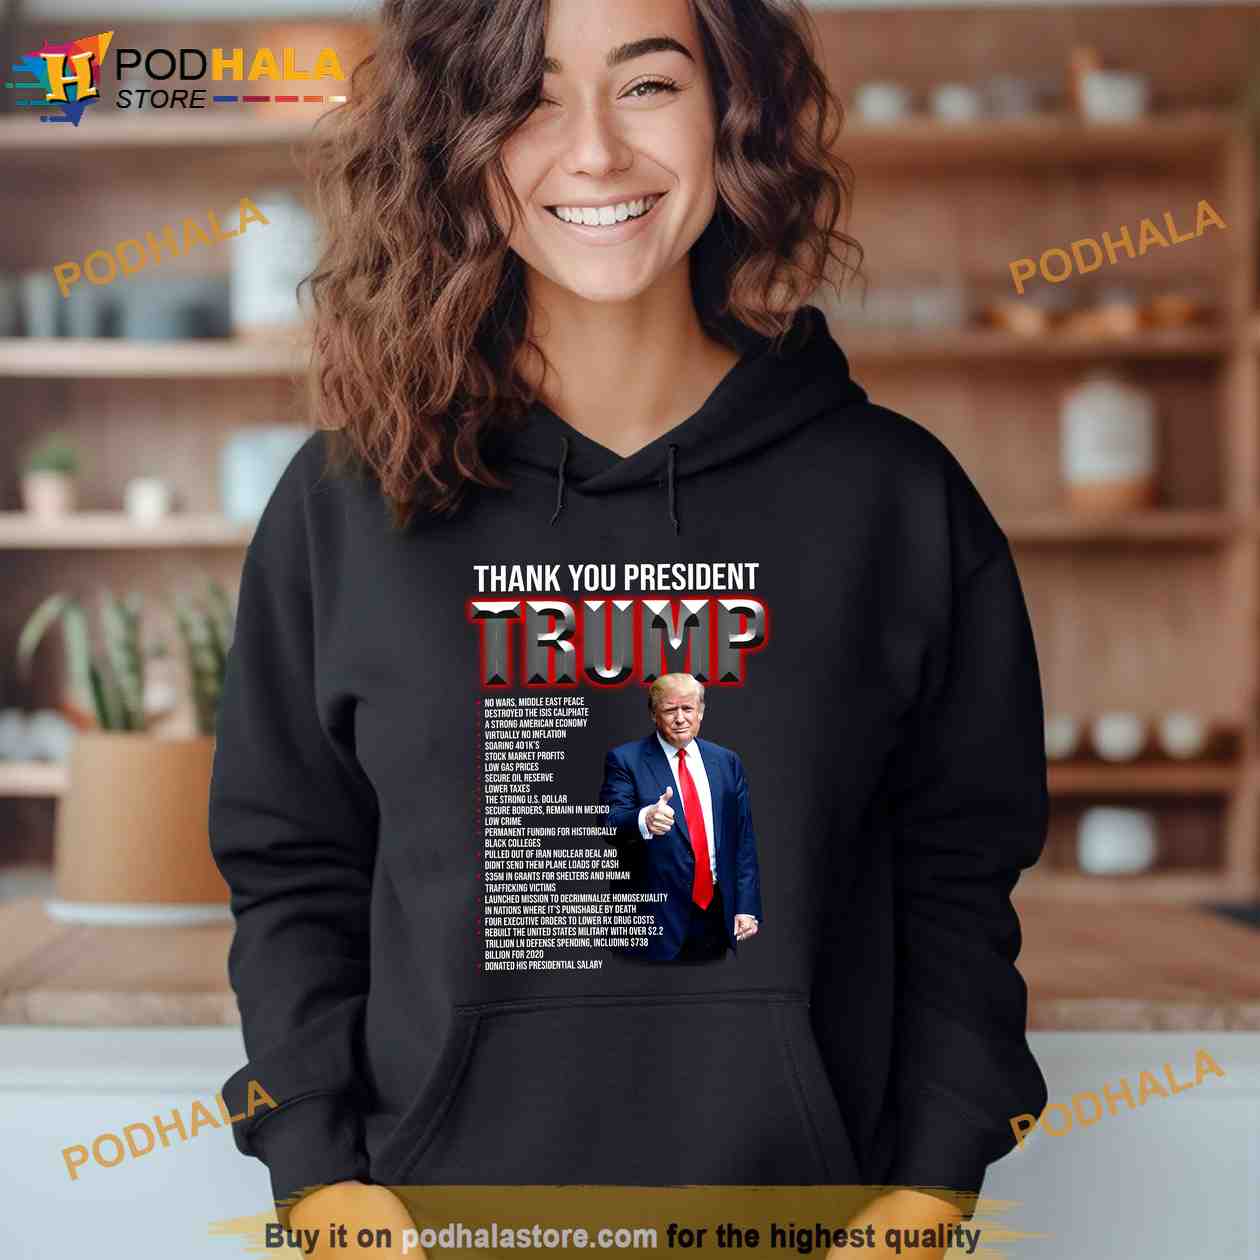 Thank You President Trump Shirt, No Wars - Middle East Peace, Donald Trump Gifts